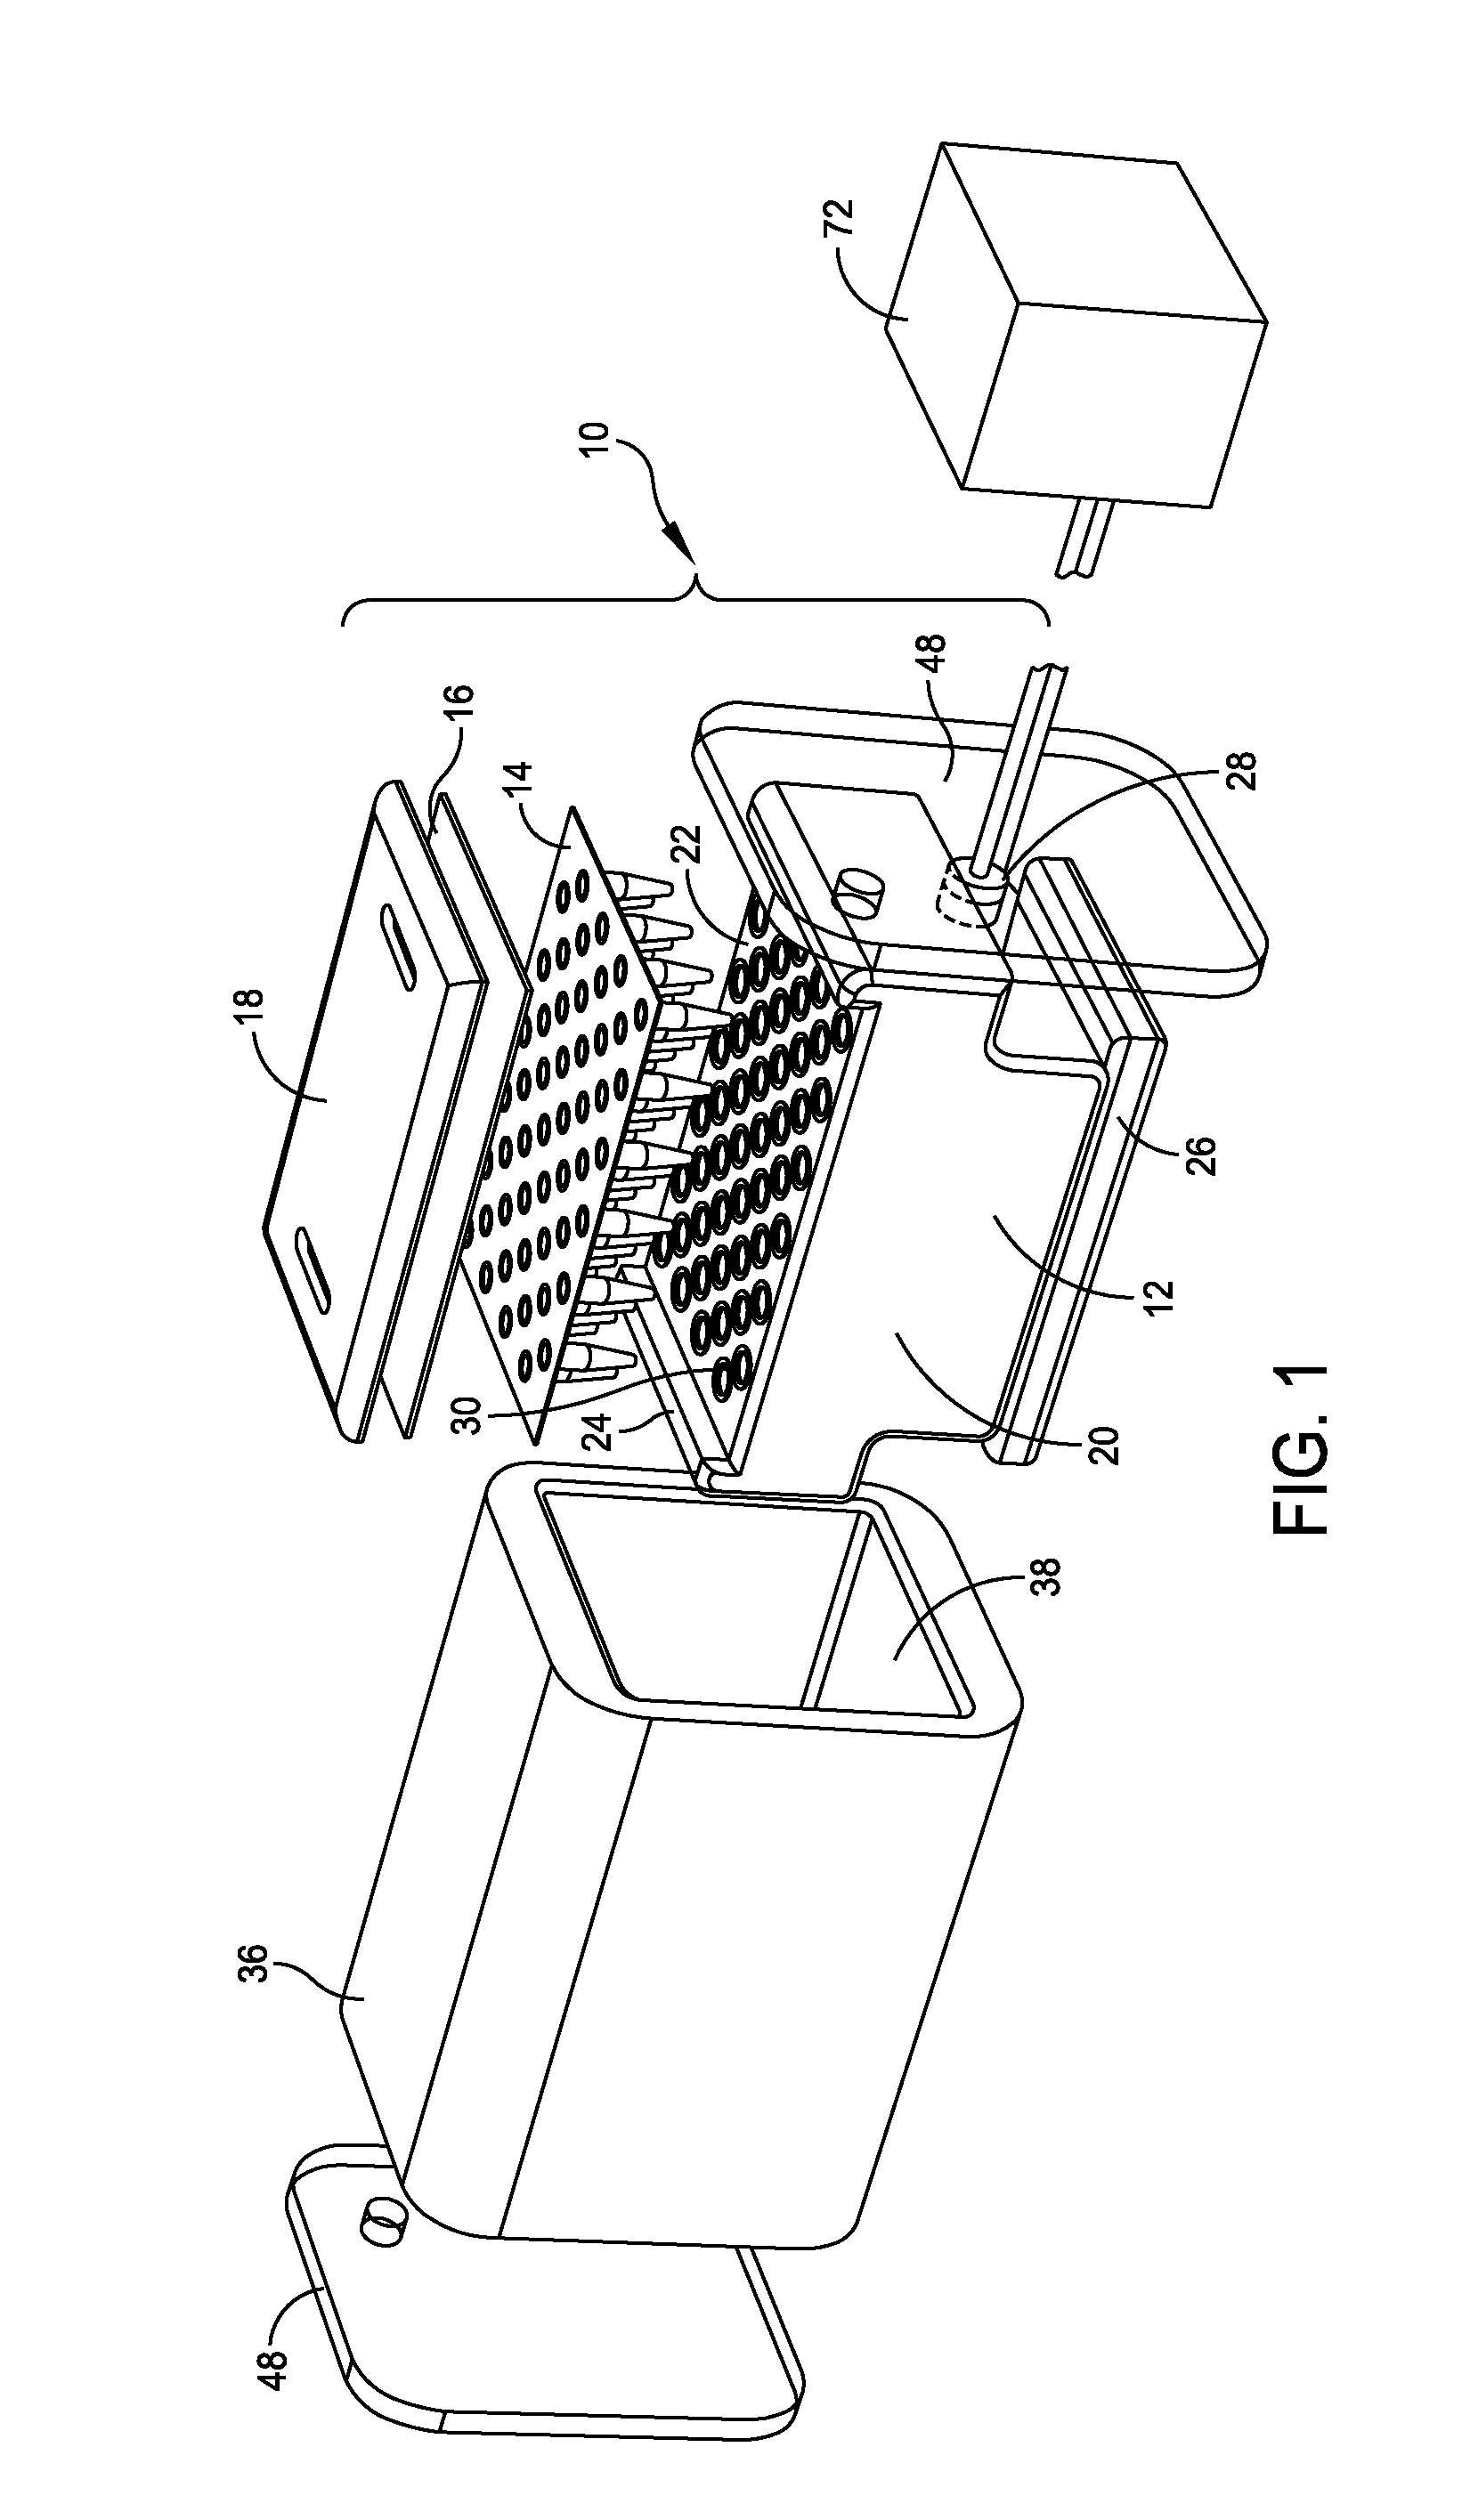 System and method for microplate pressurization